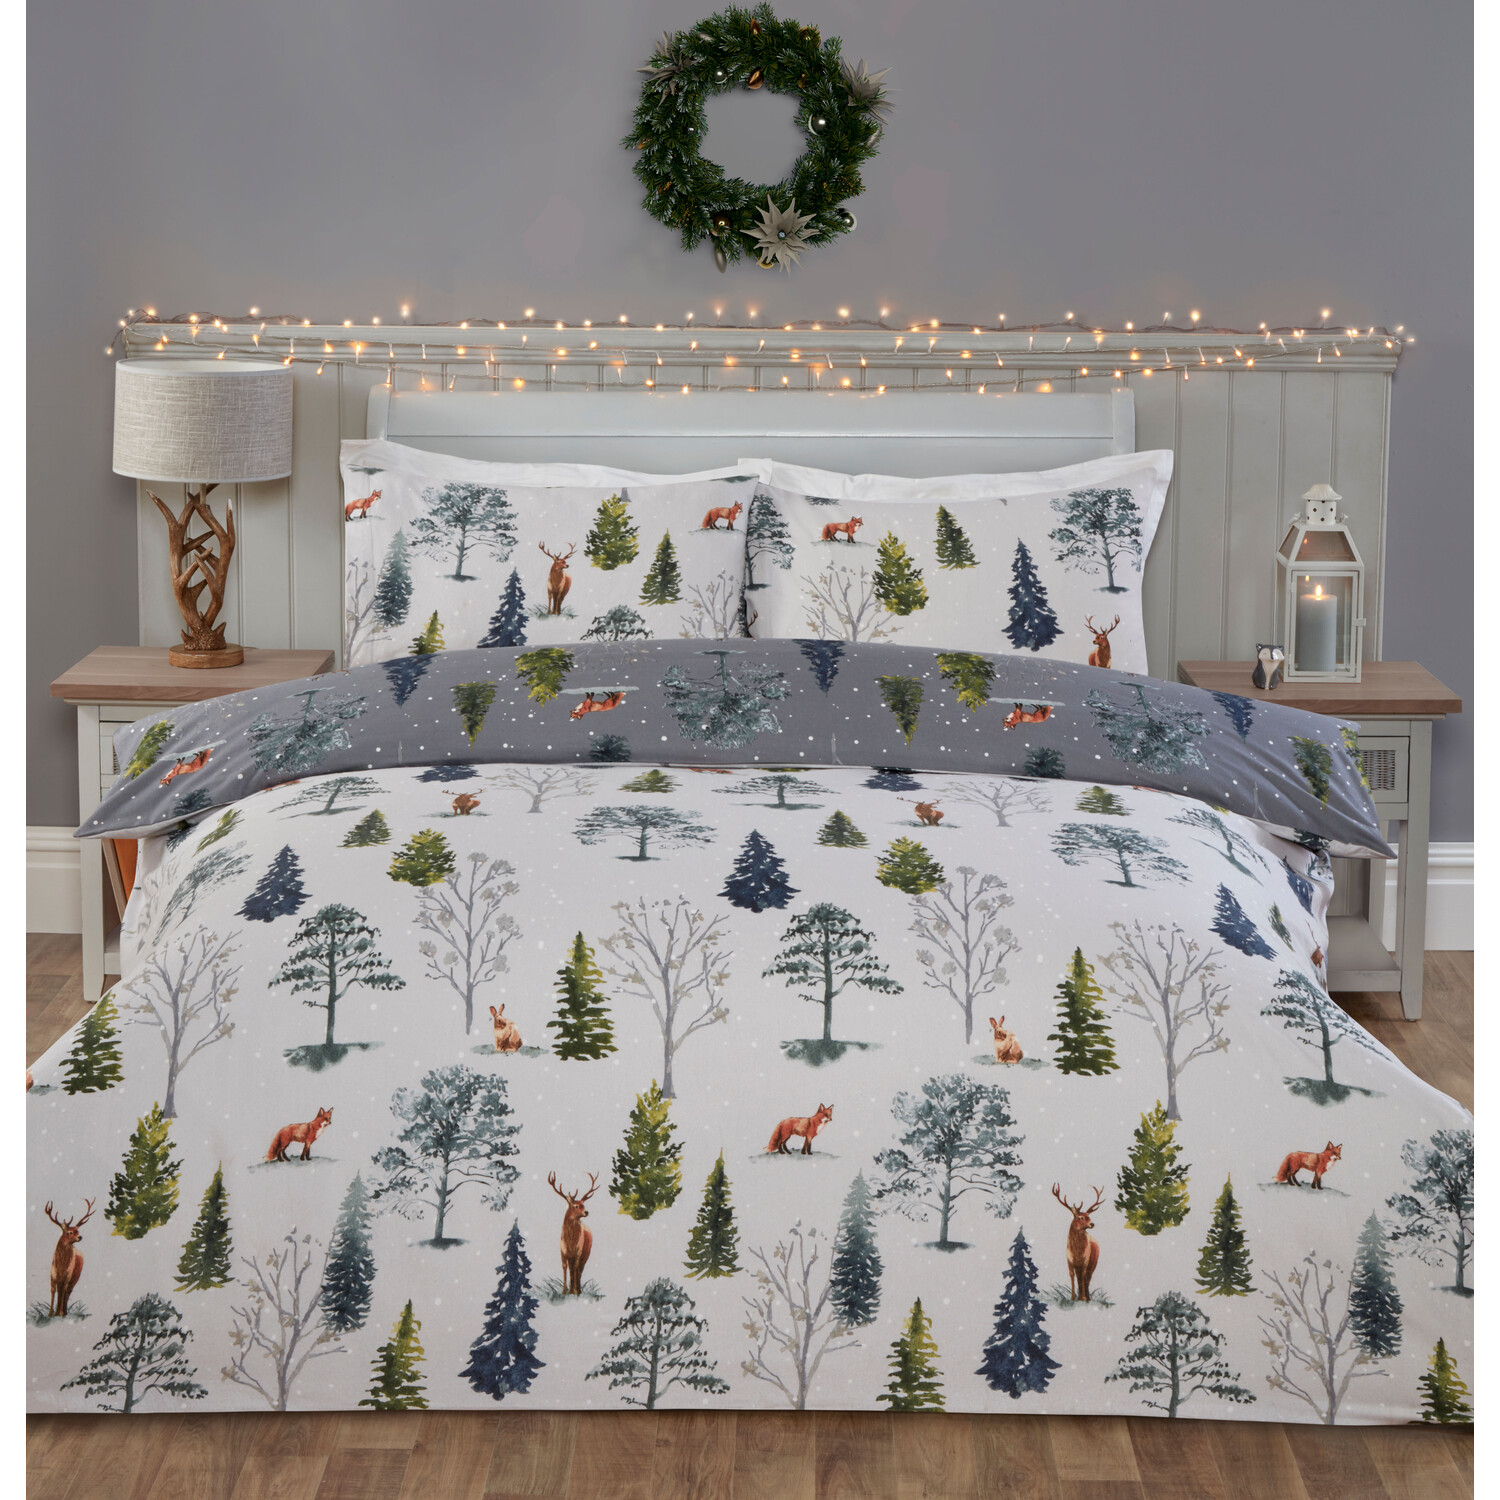 Snowy Forest Duvet Cover and Pillowcase Set - Grey / King Image 2